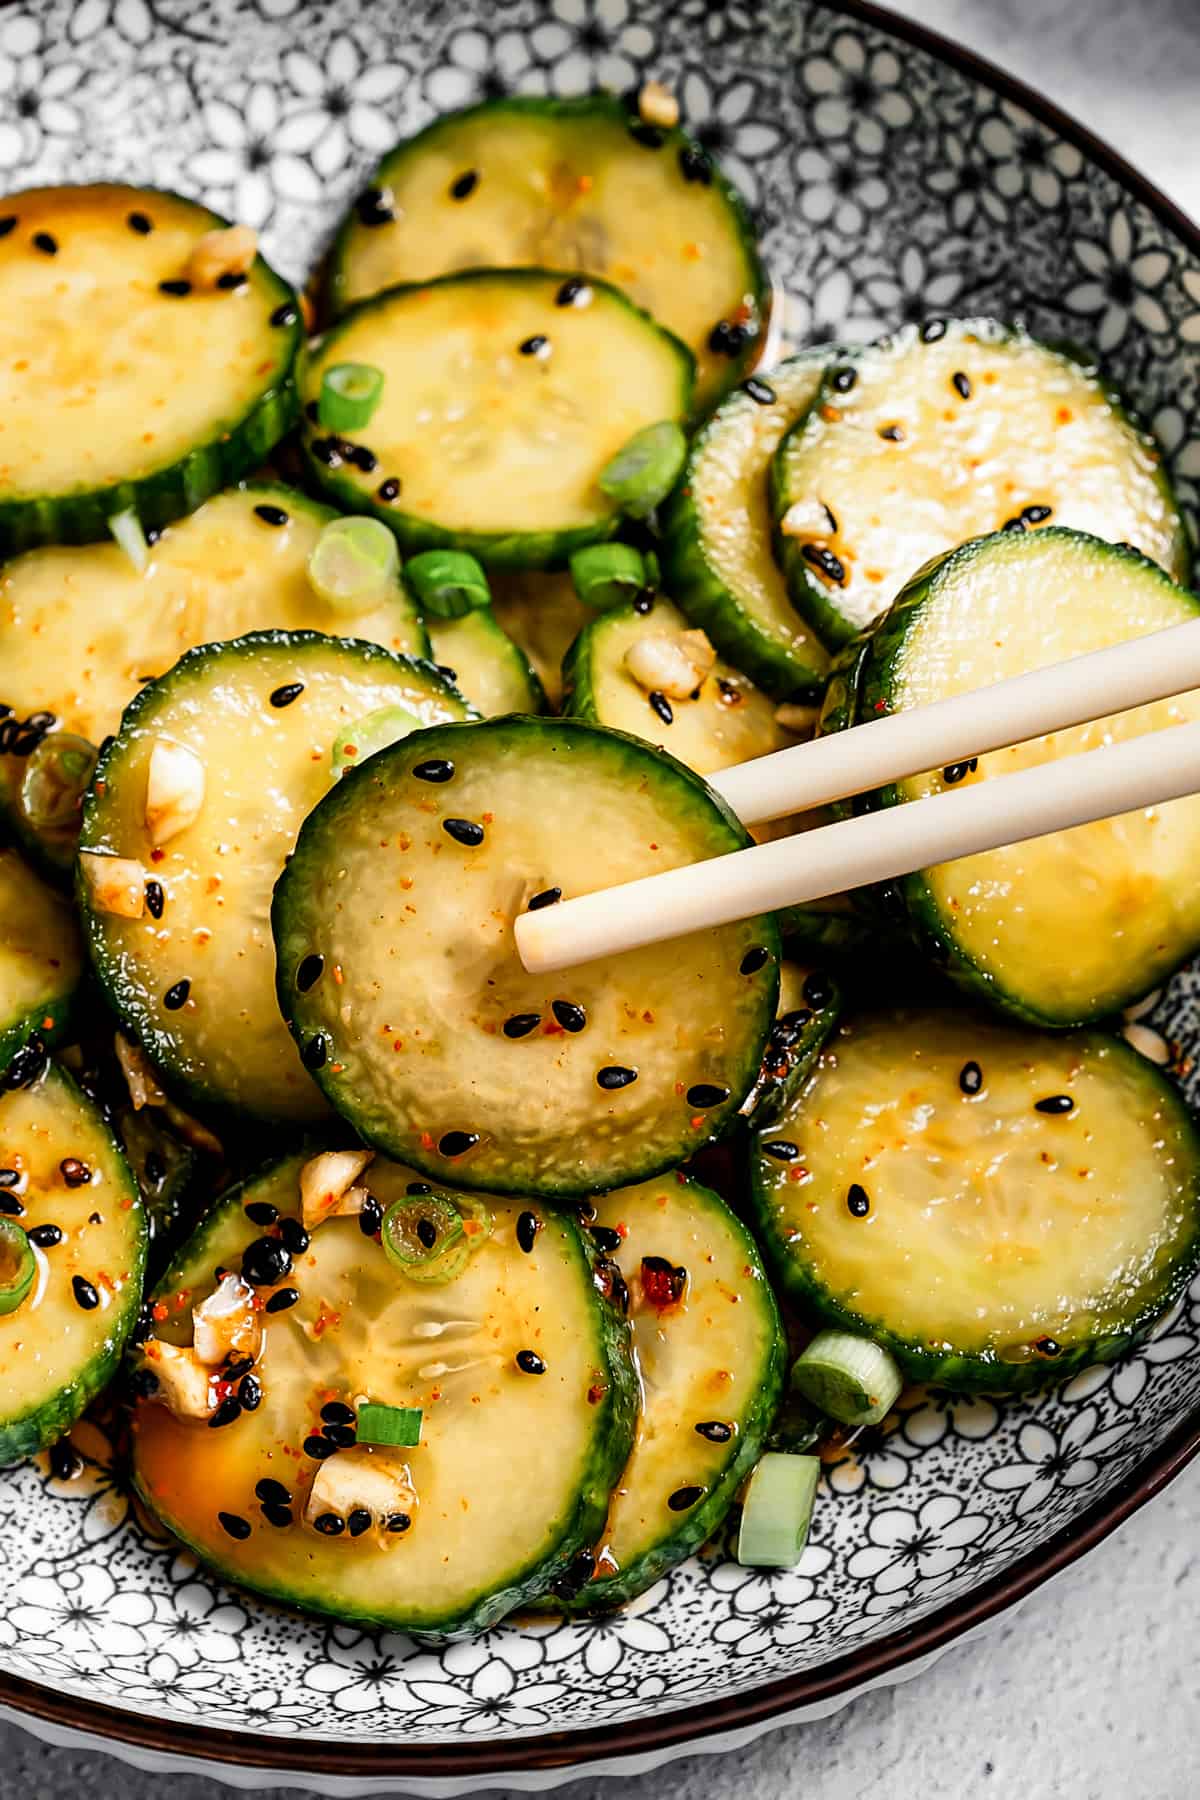 Grabbing a cucumber from the Asian cucumber salad.